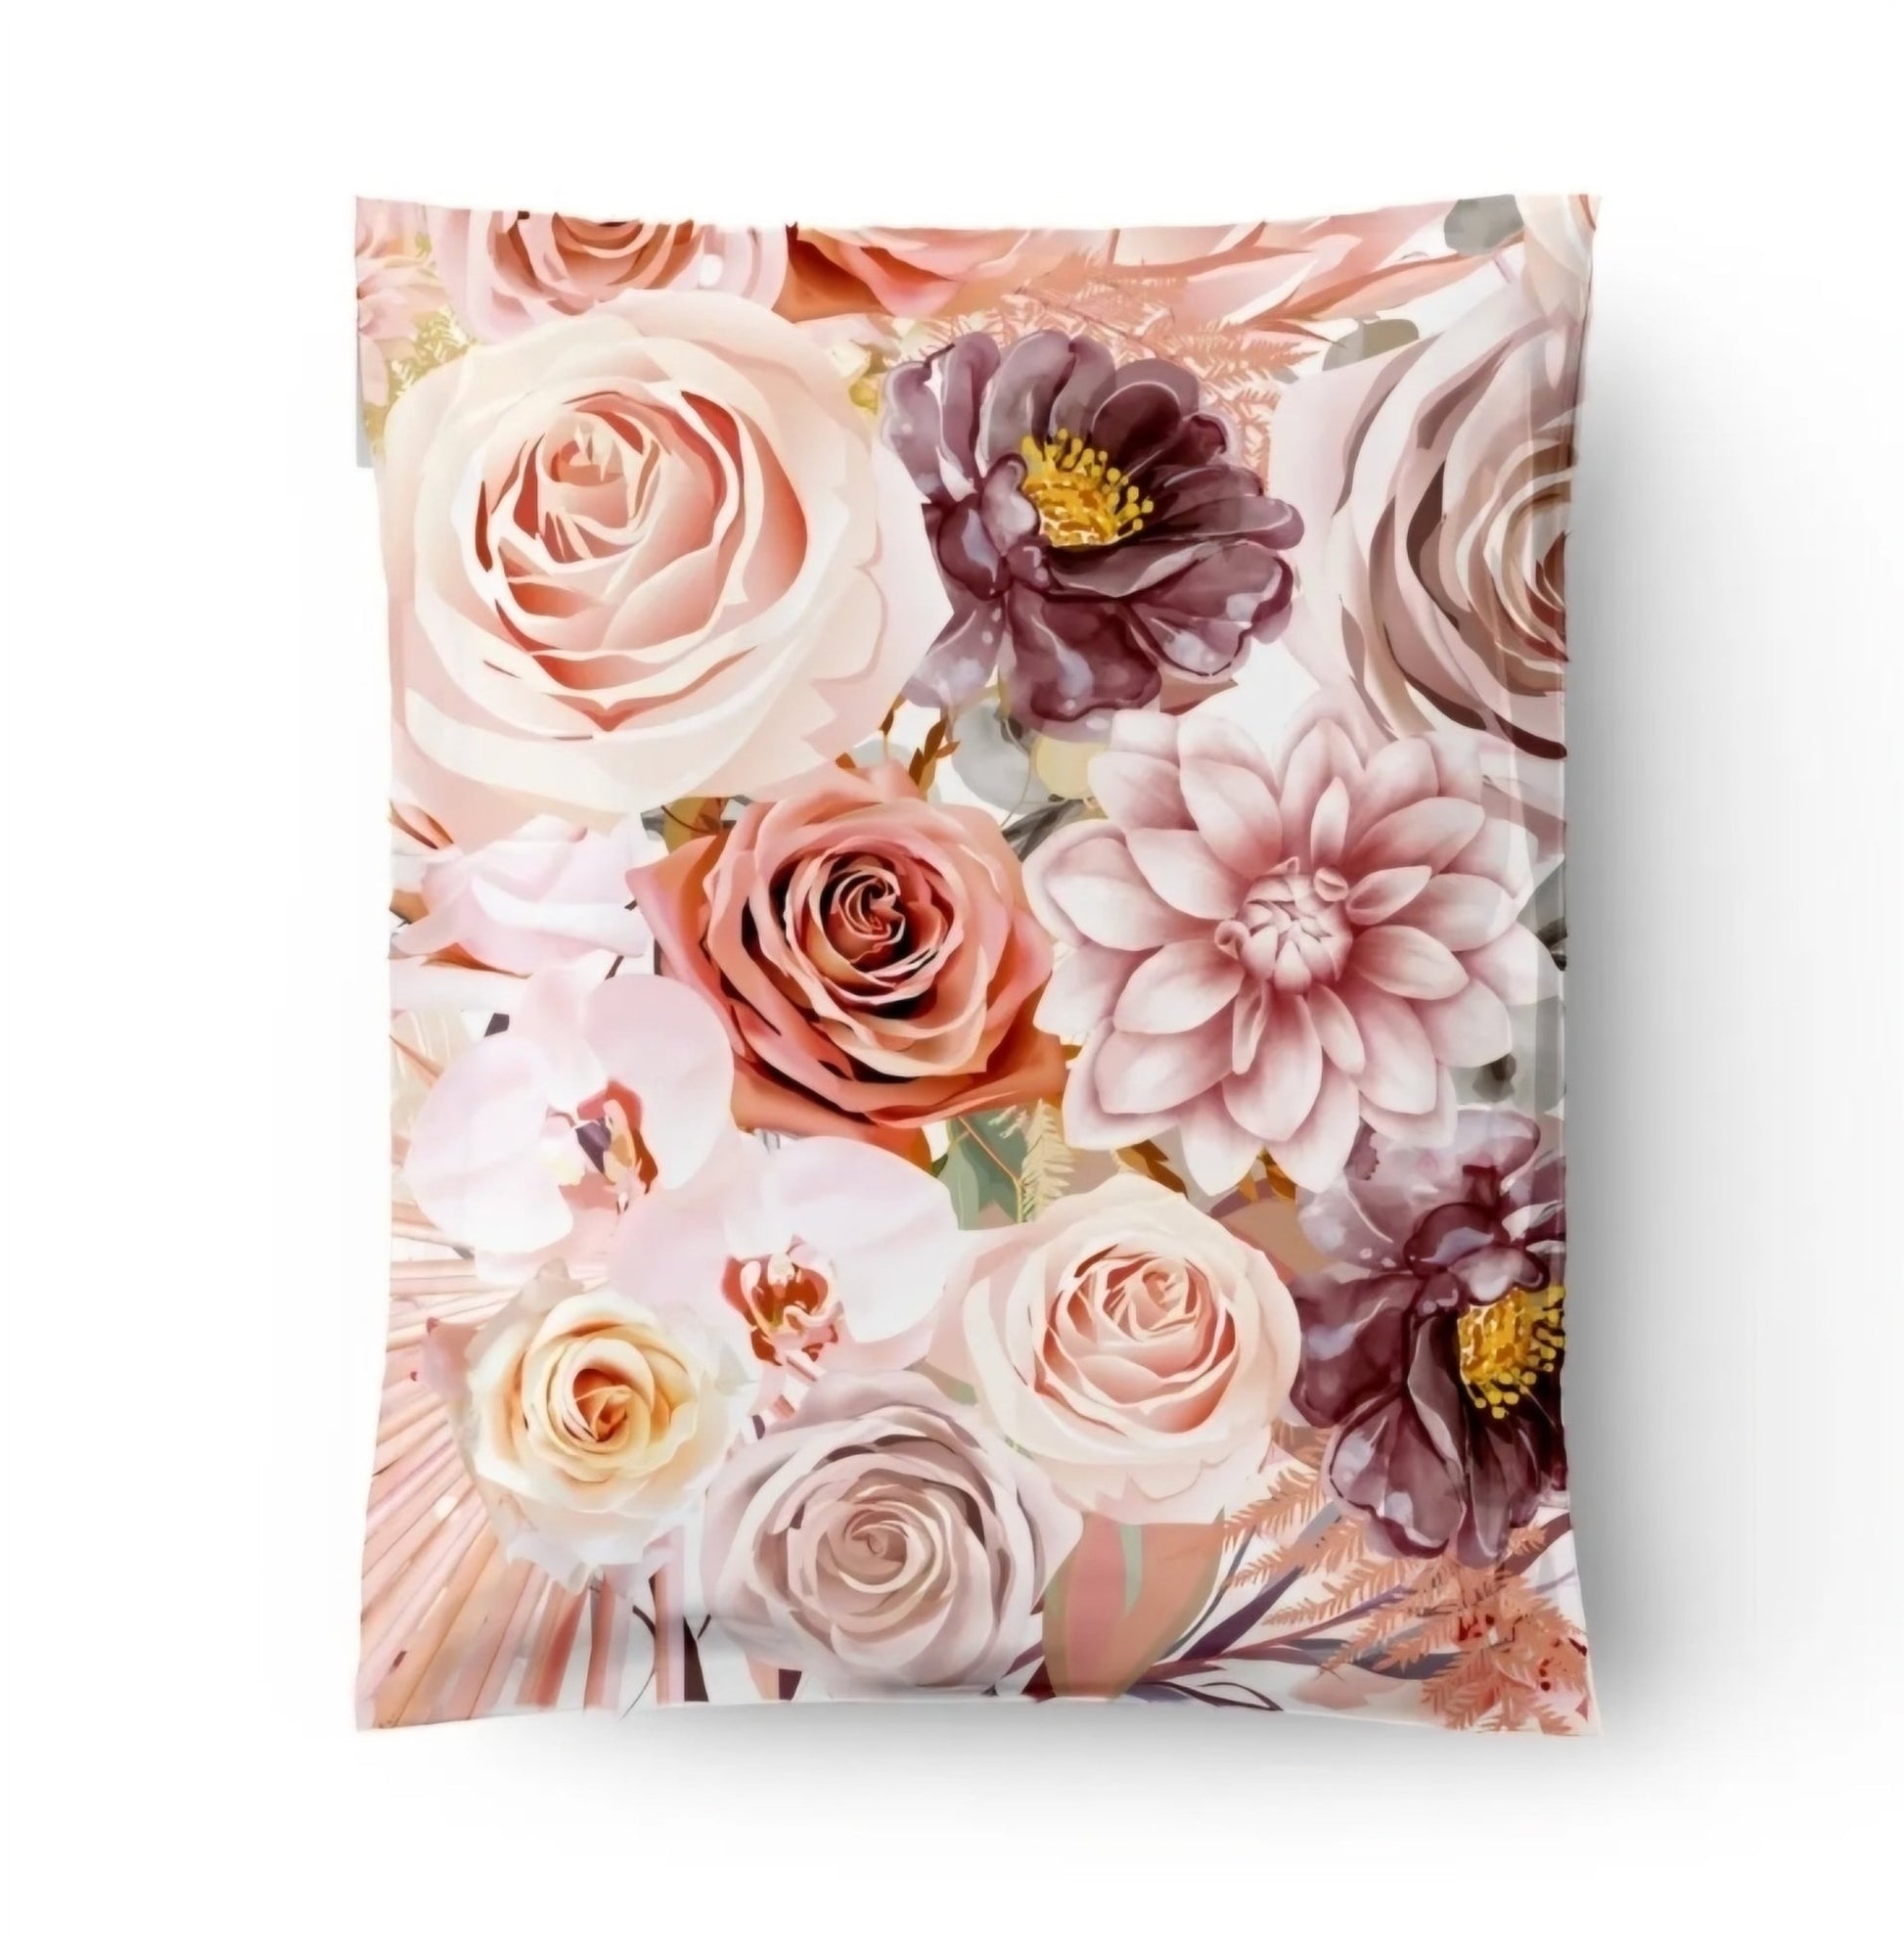 Boho Flowers & Roses Poly Mailers Size 19x24 Colorful Shipping Bags - Shipping In Style